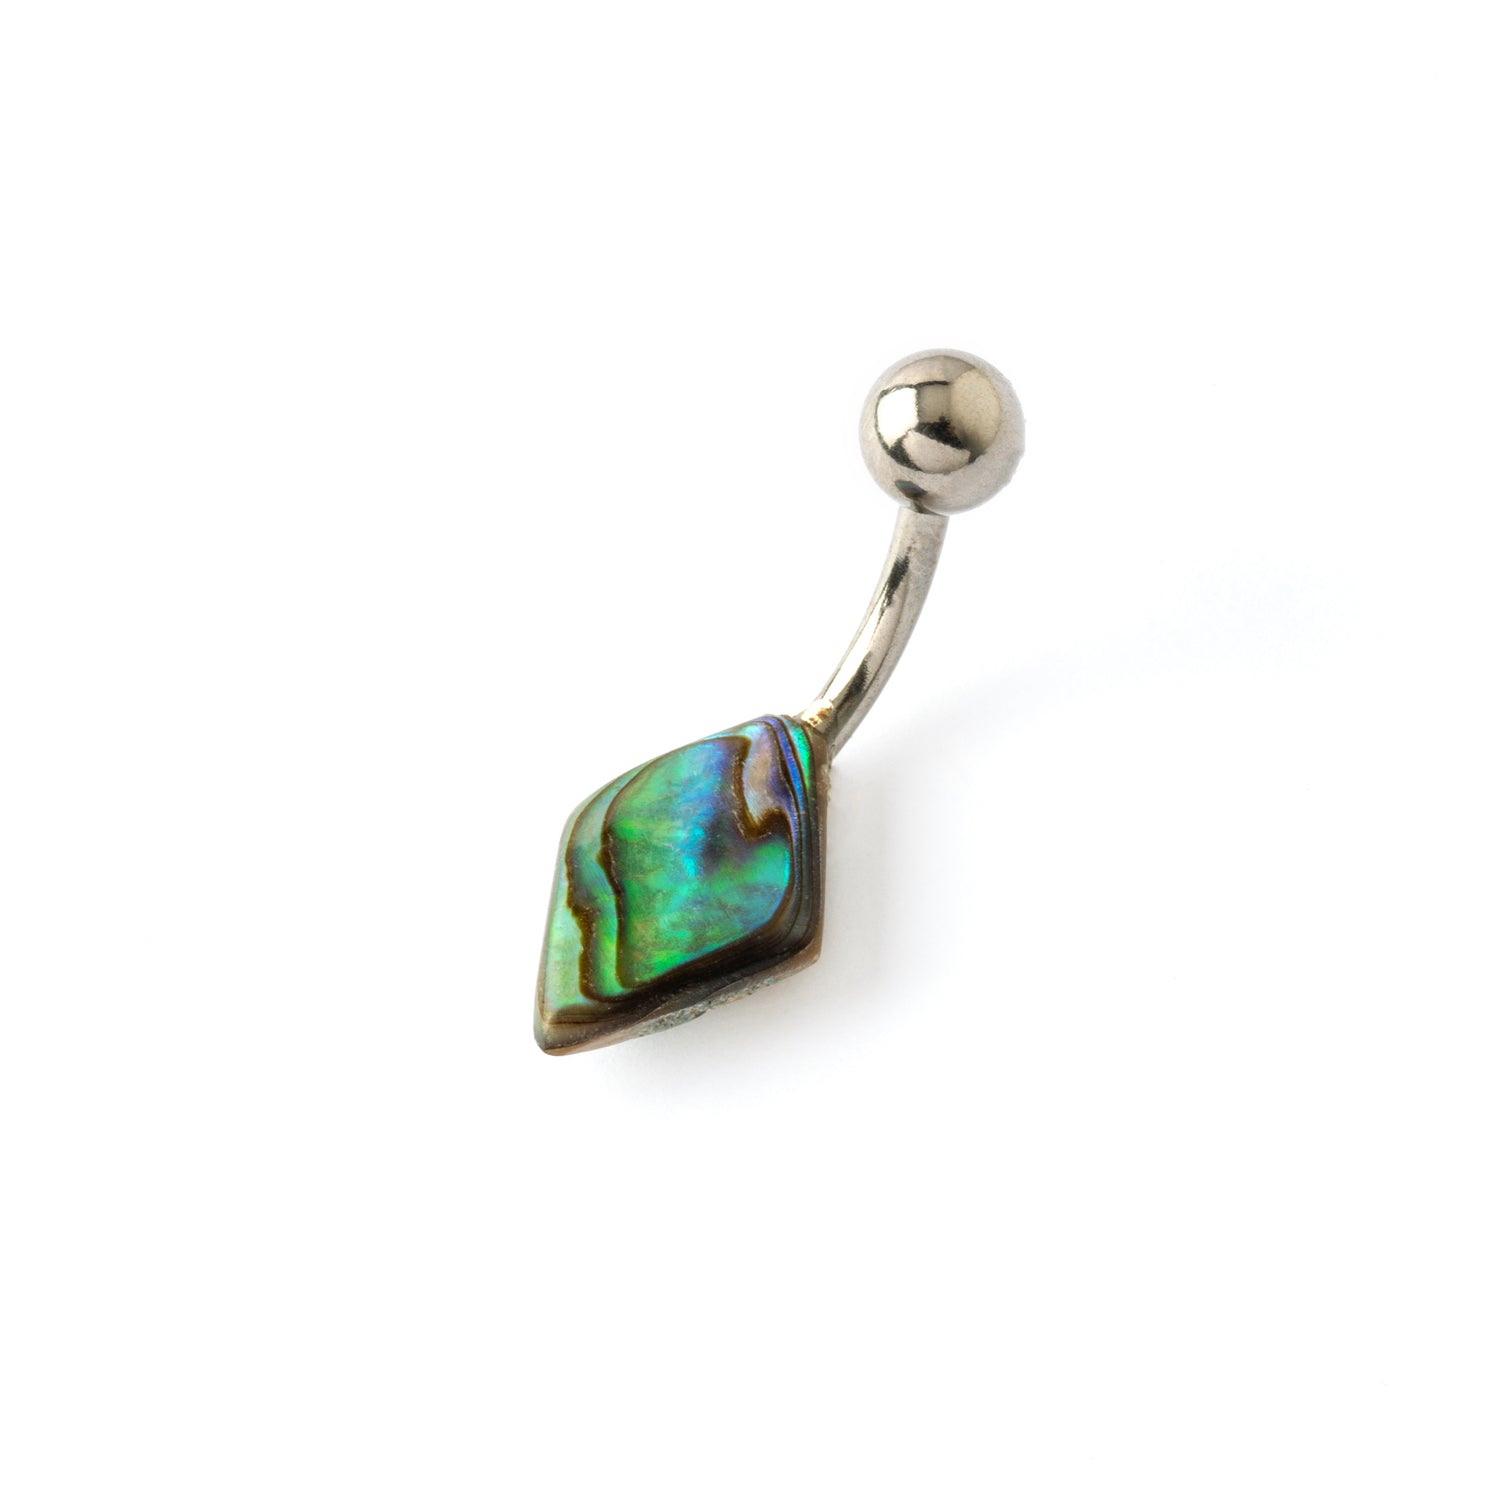 Rhombus Abalone on a surgical steel belly piercing right side view